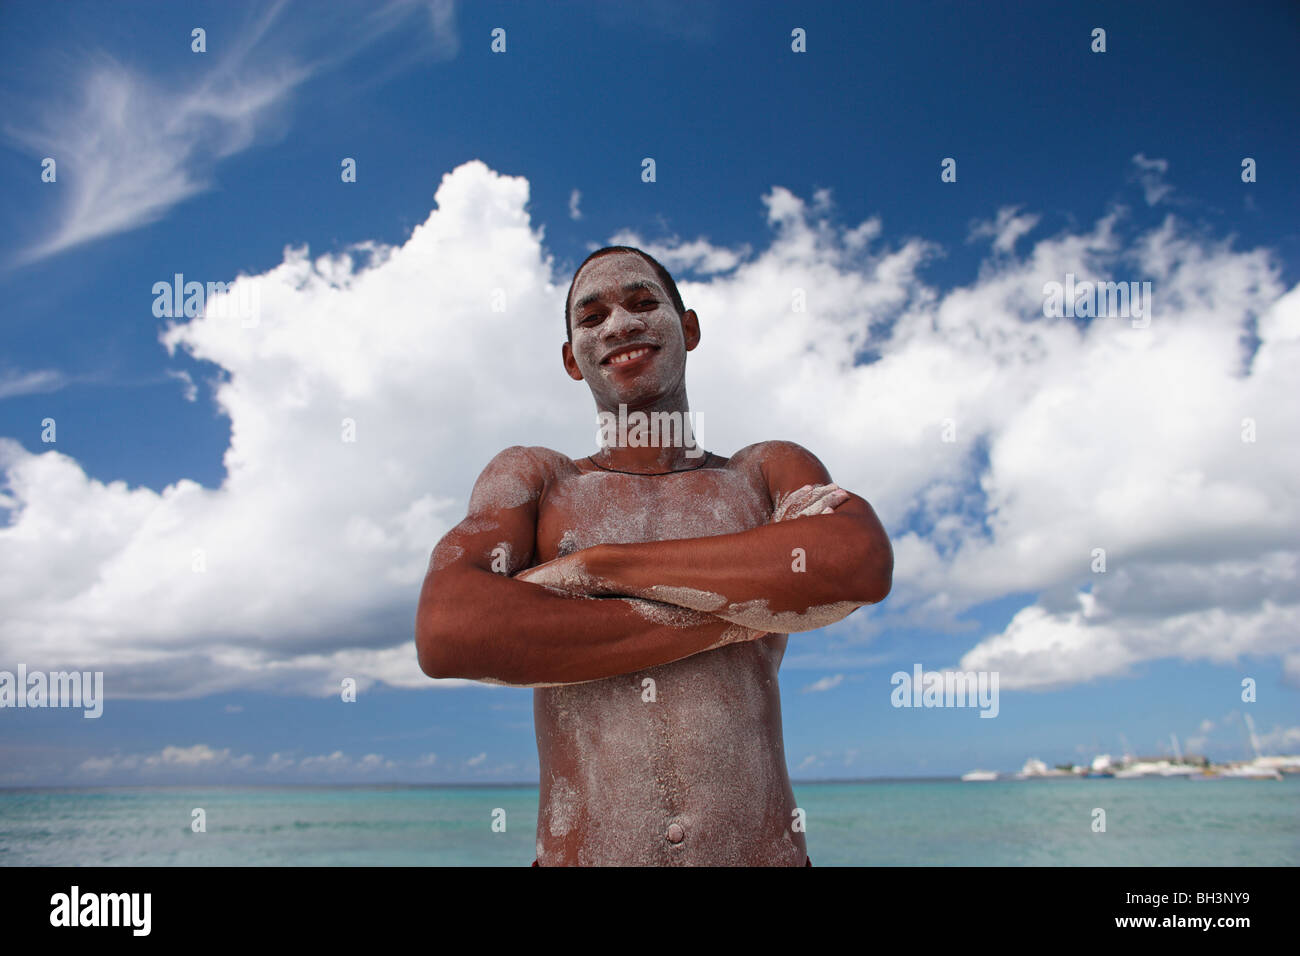 Young man standing on tropical beach with sand on his body, smiling Stock Photo